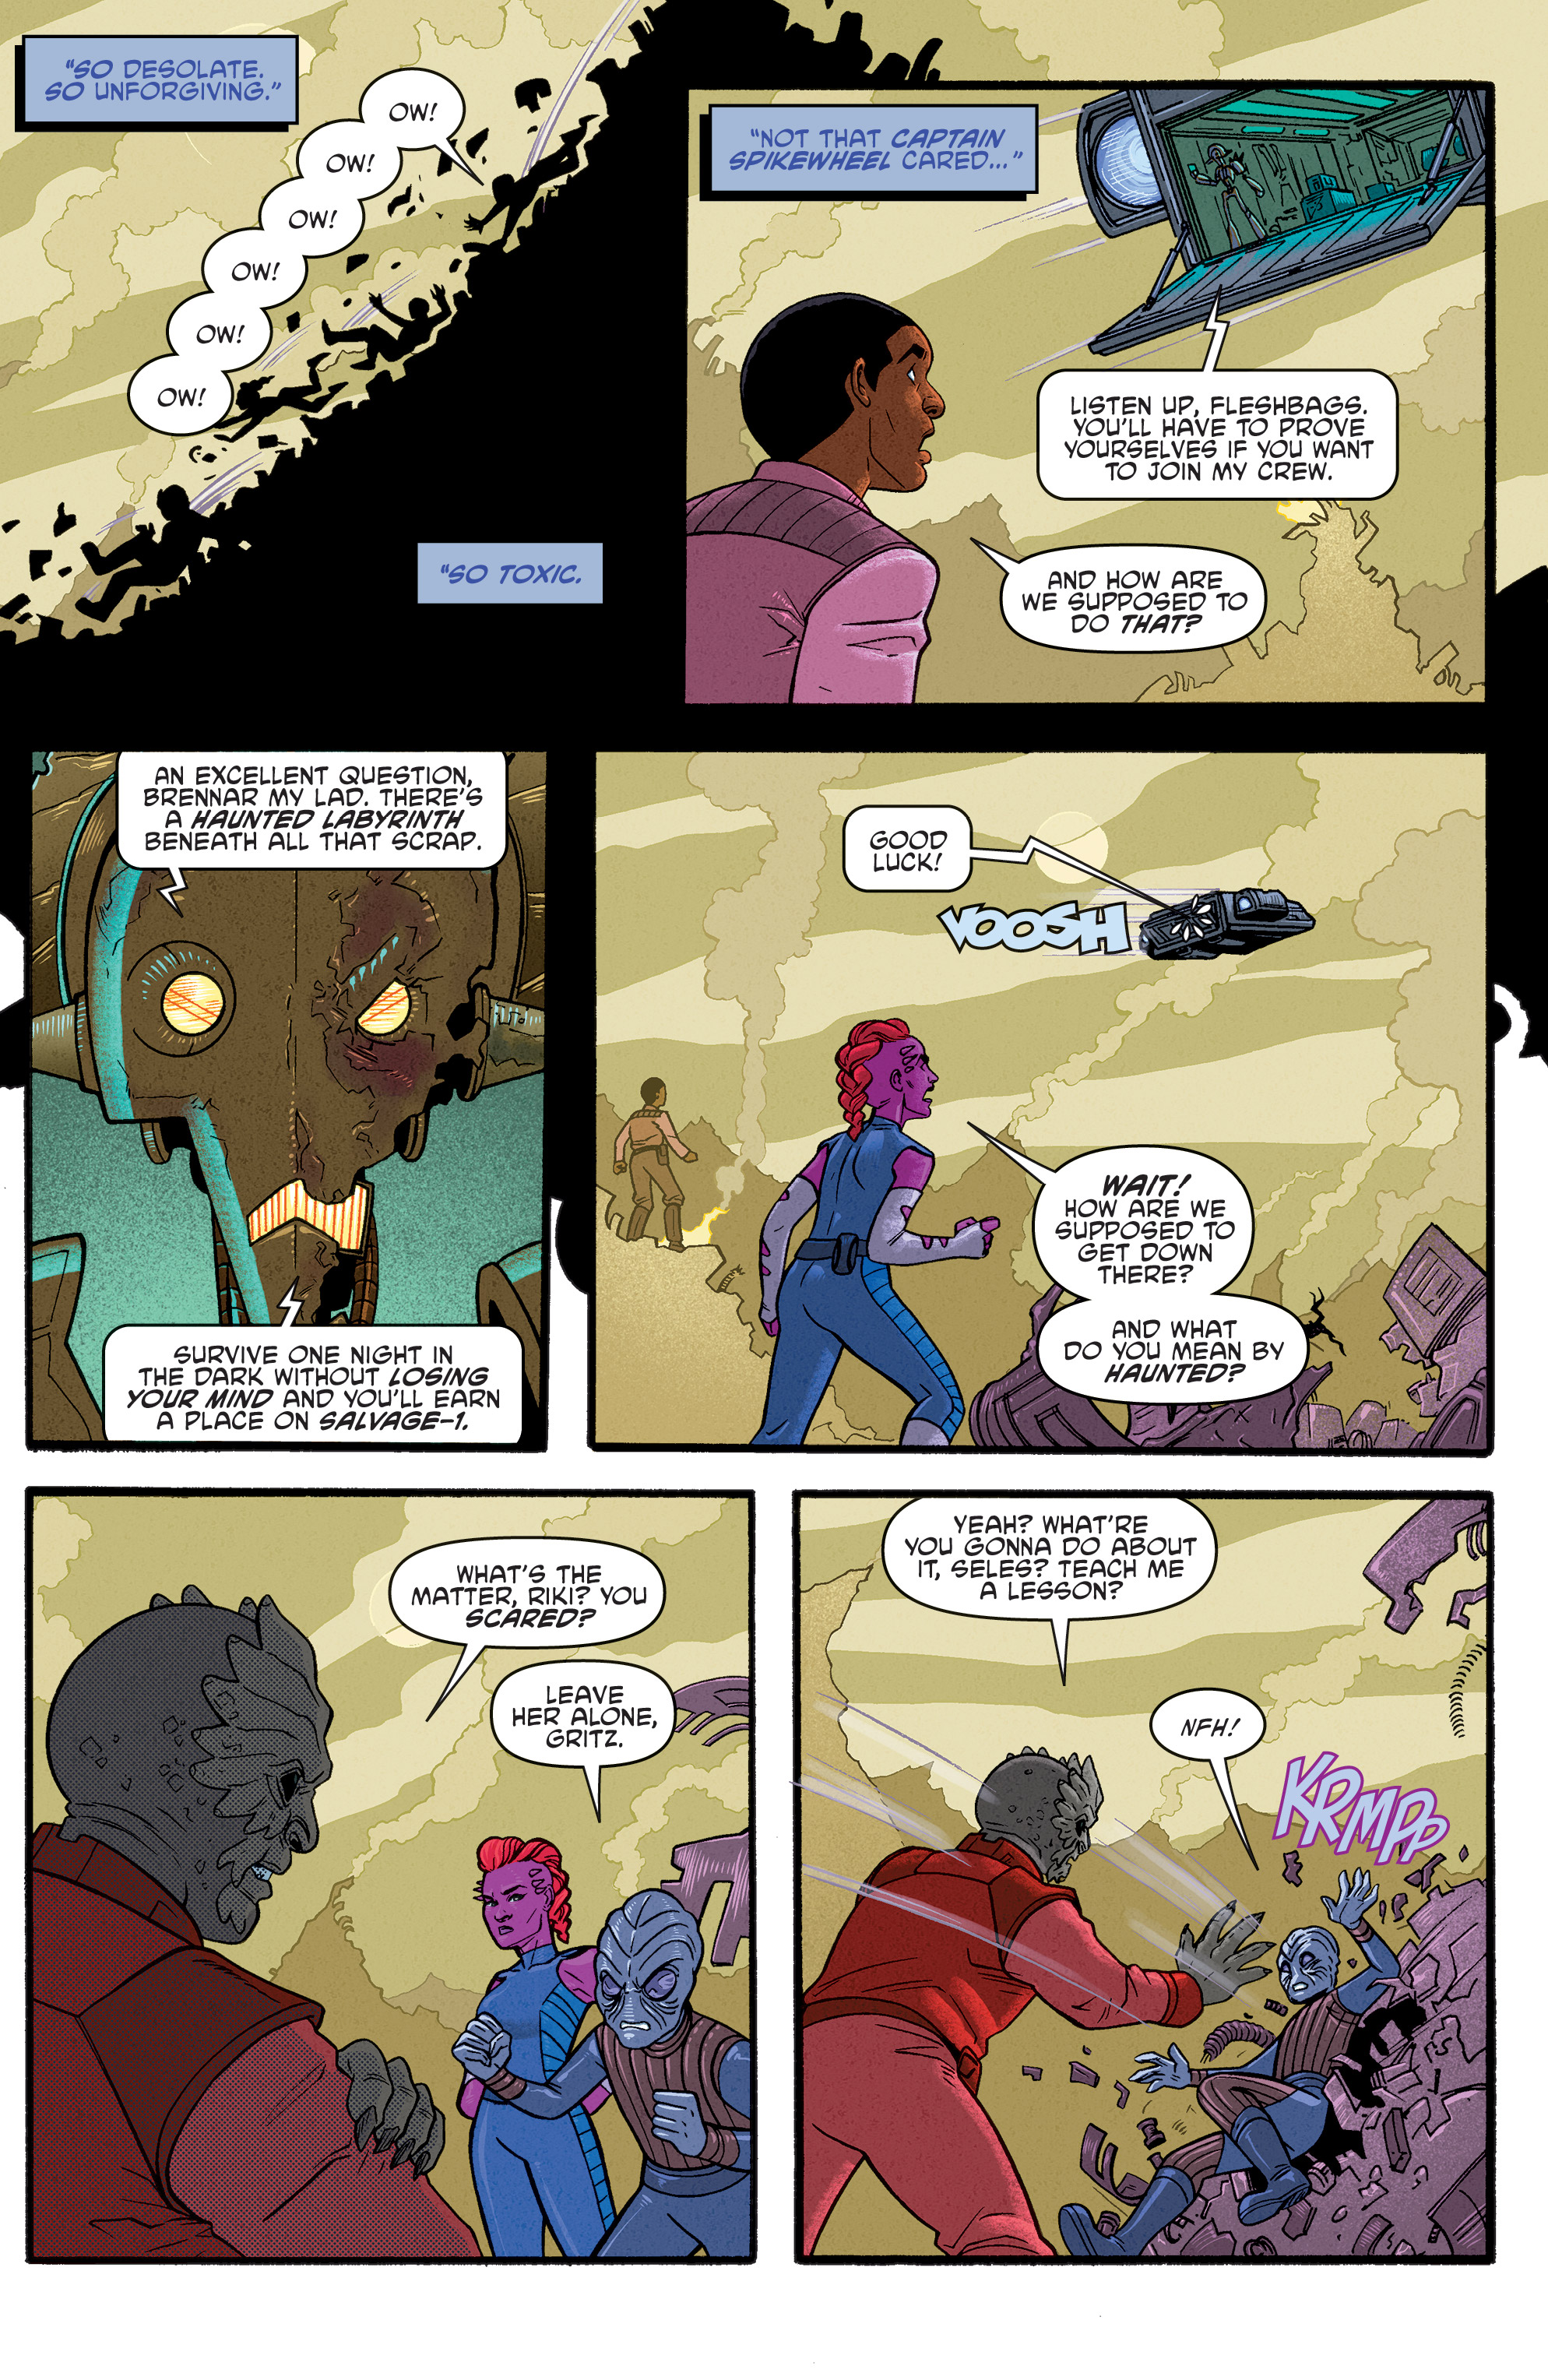 Star Wars Adventures: Return to Vader’s Castle (2019-): Chapter 1 - Page 6